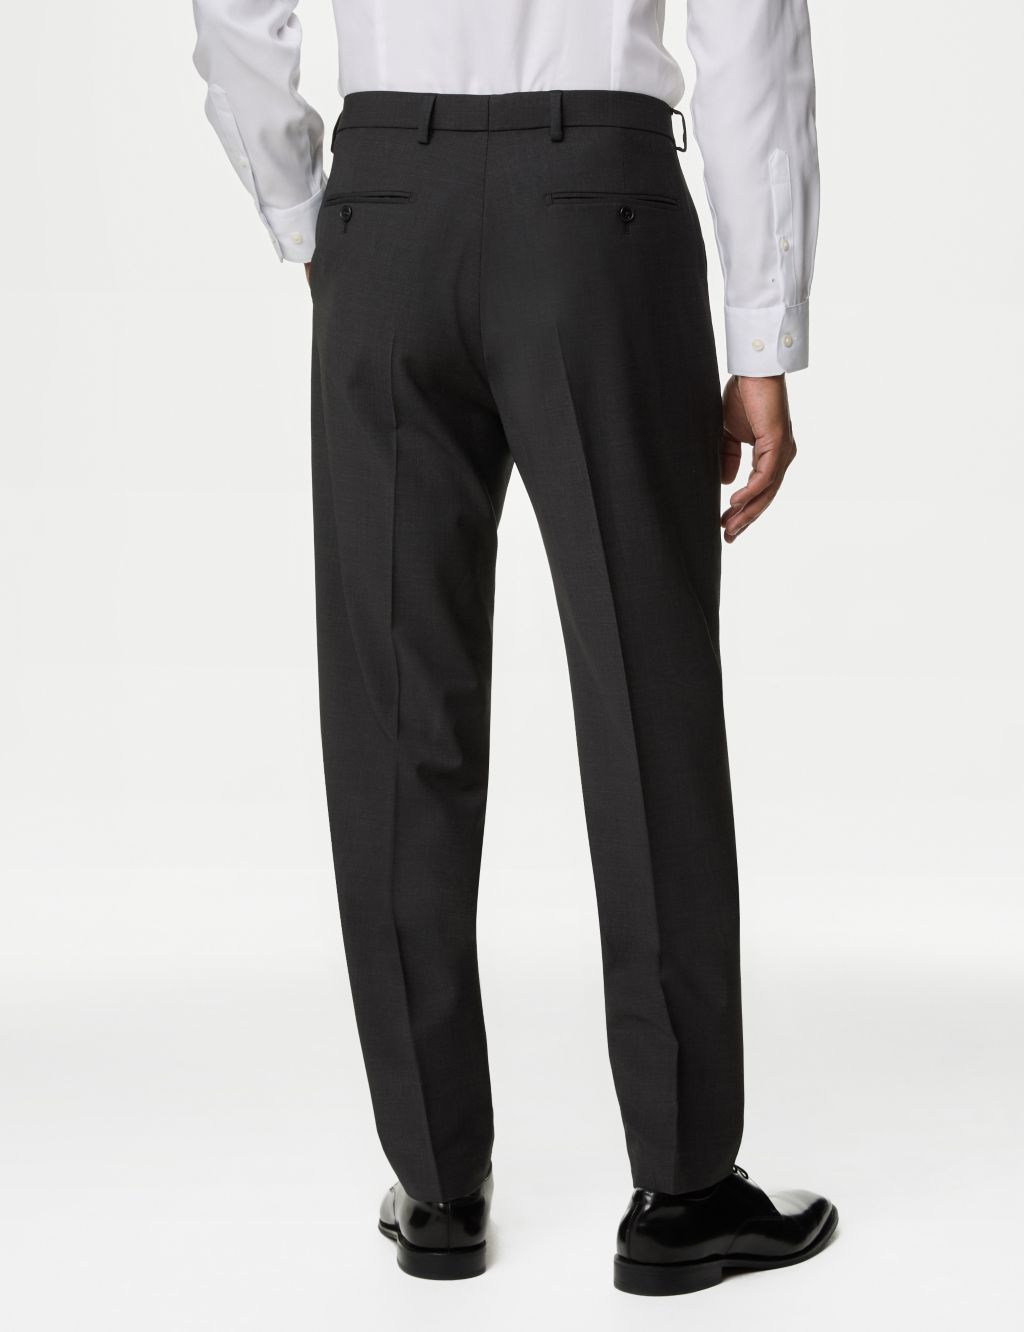 The Ultimate Tailored Fit Suit image 5